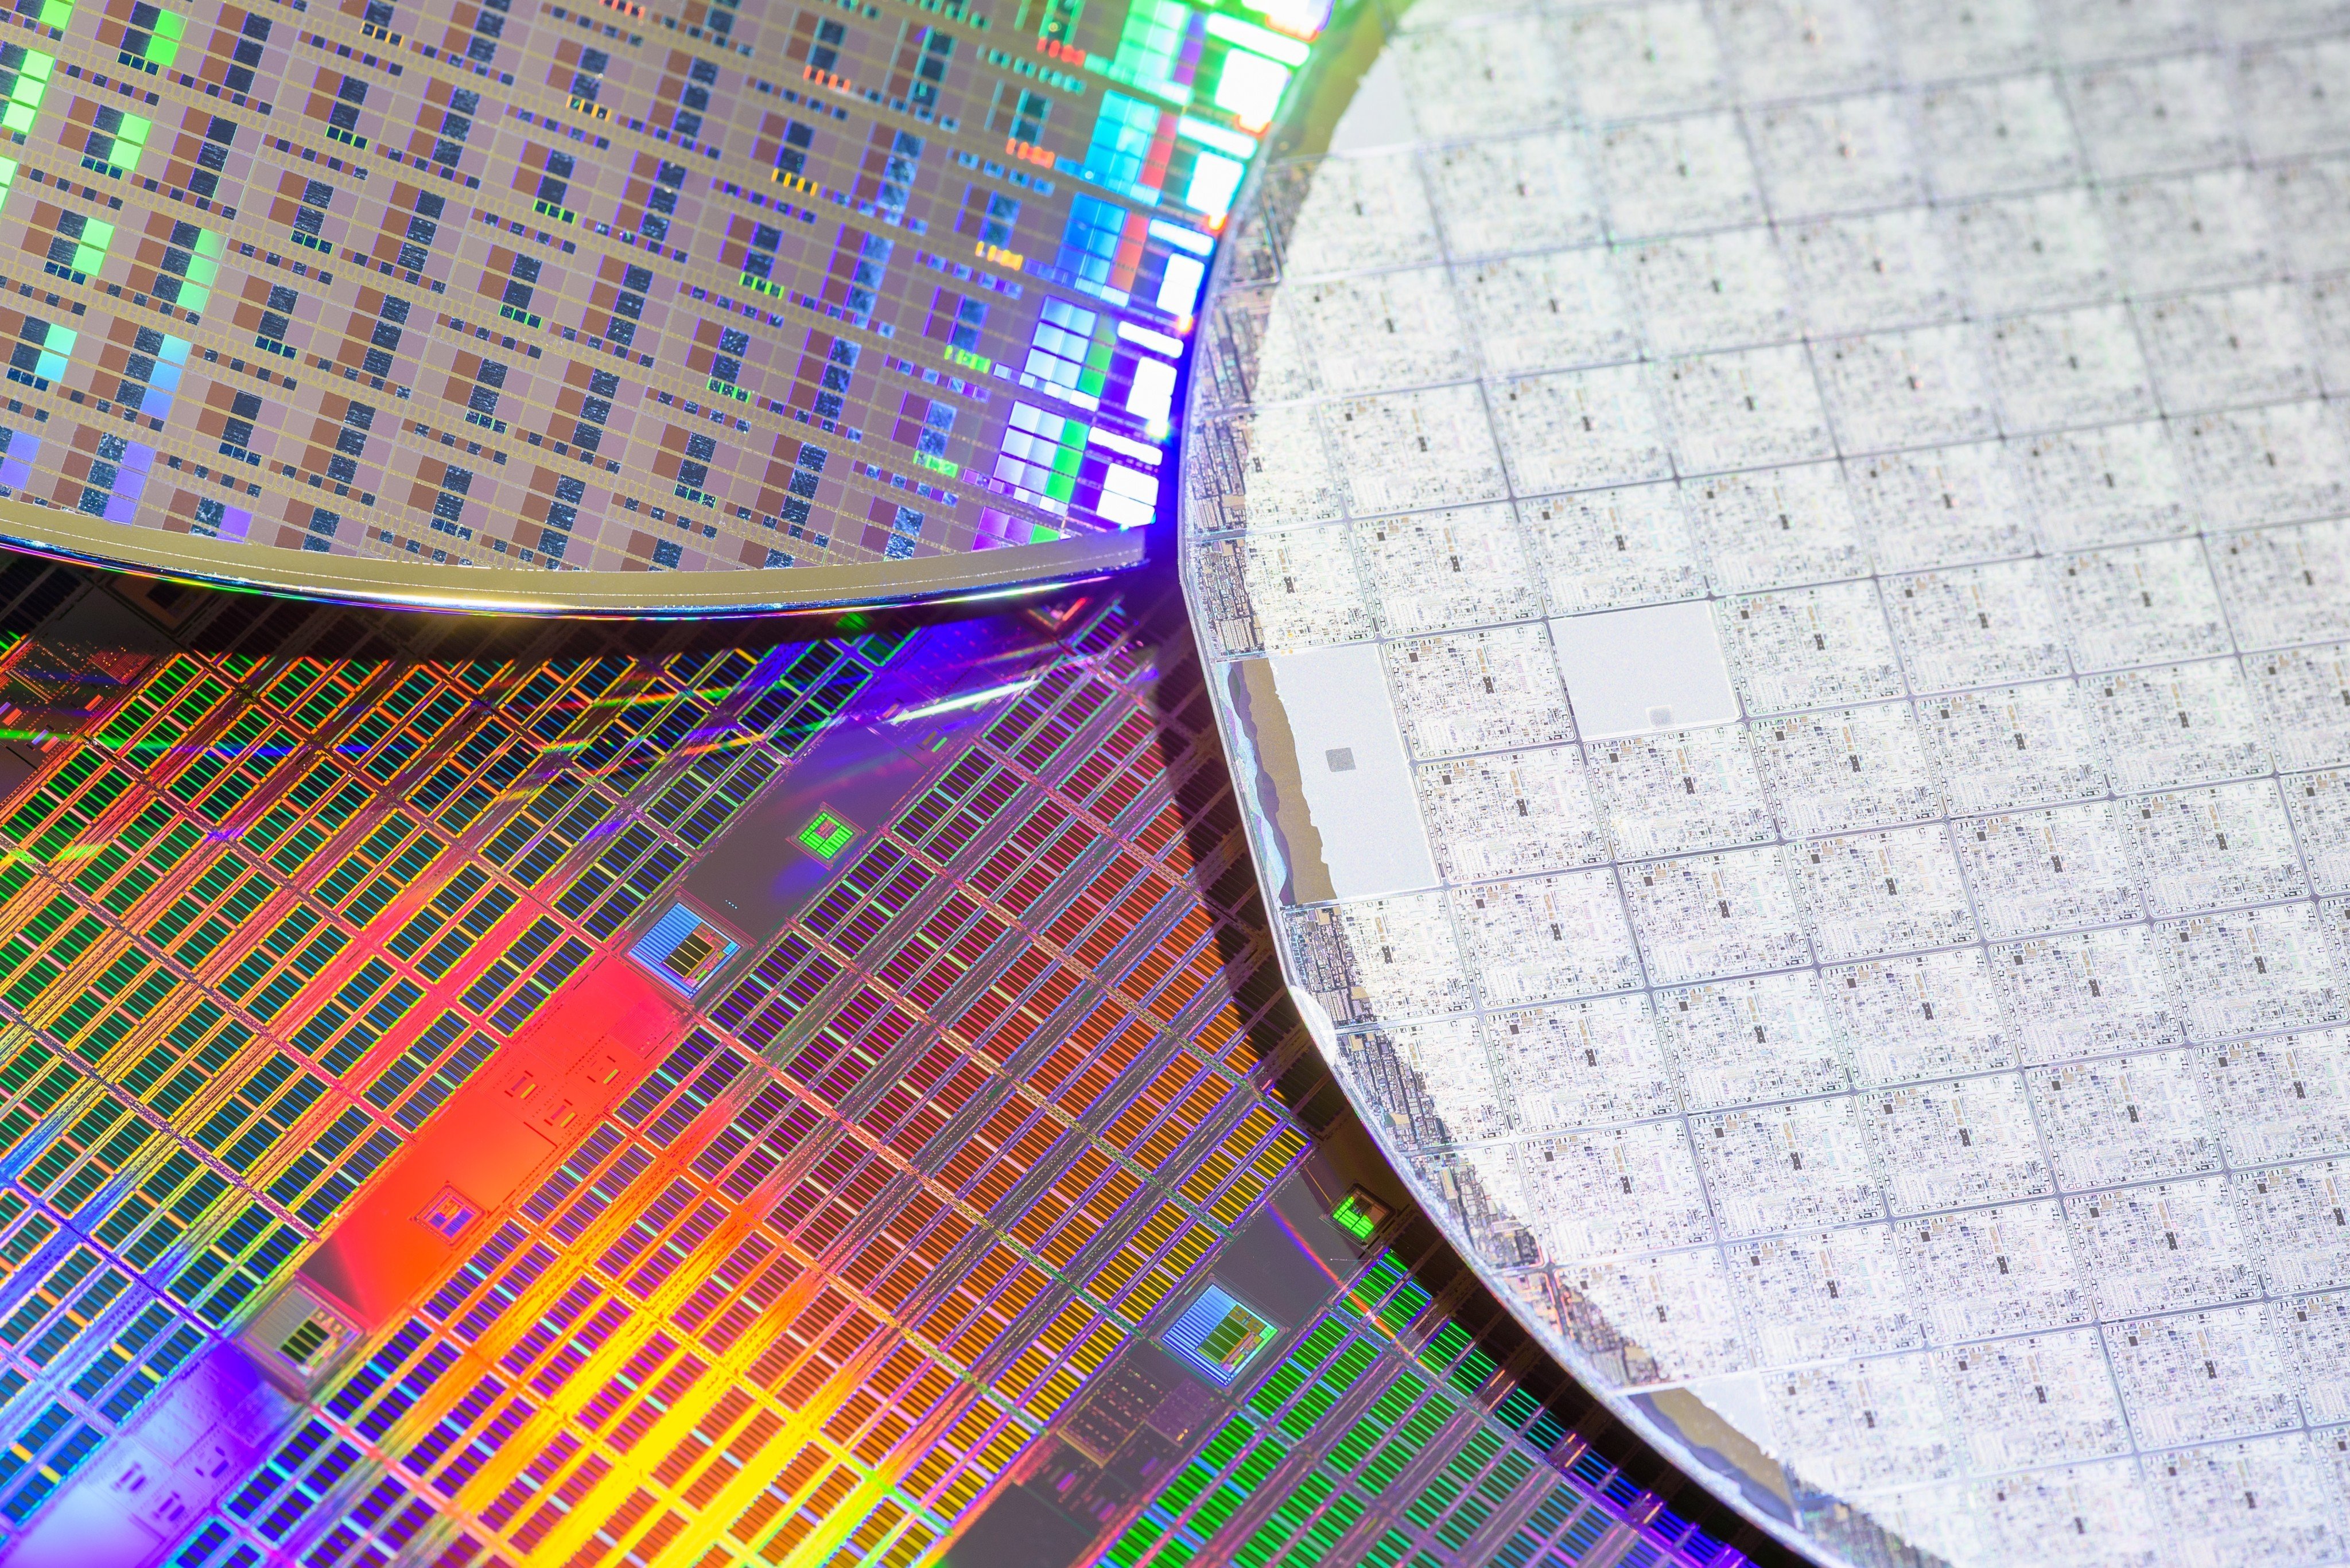 The team’s method reduces the costs of making wafers. Photo: Shutterstock